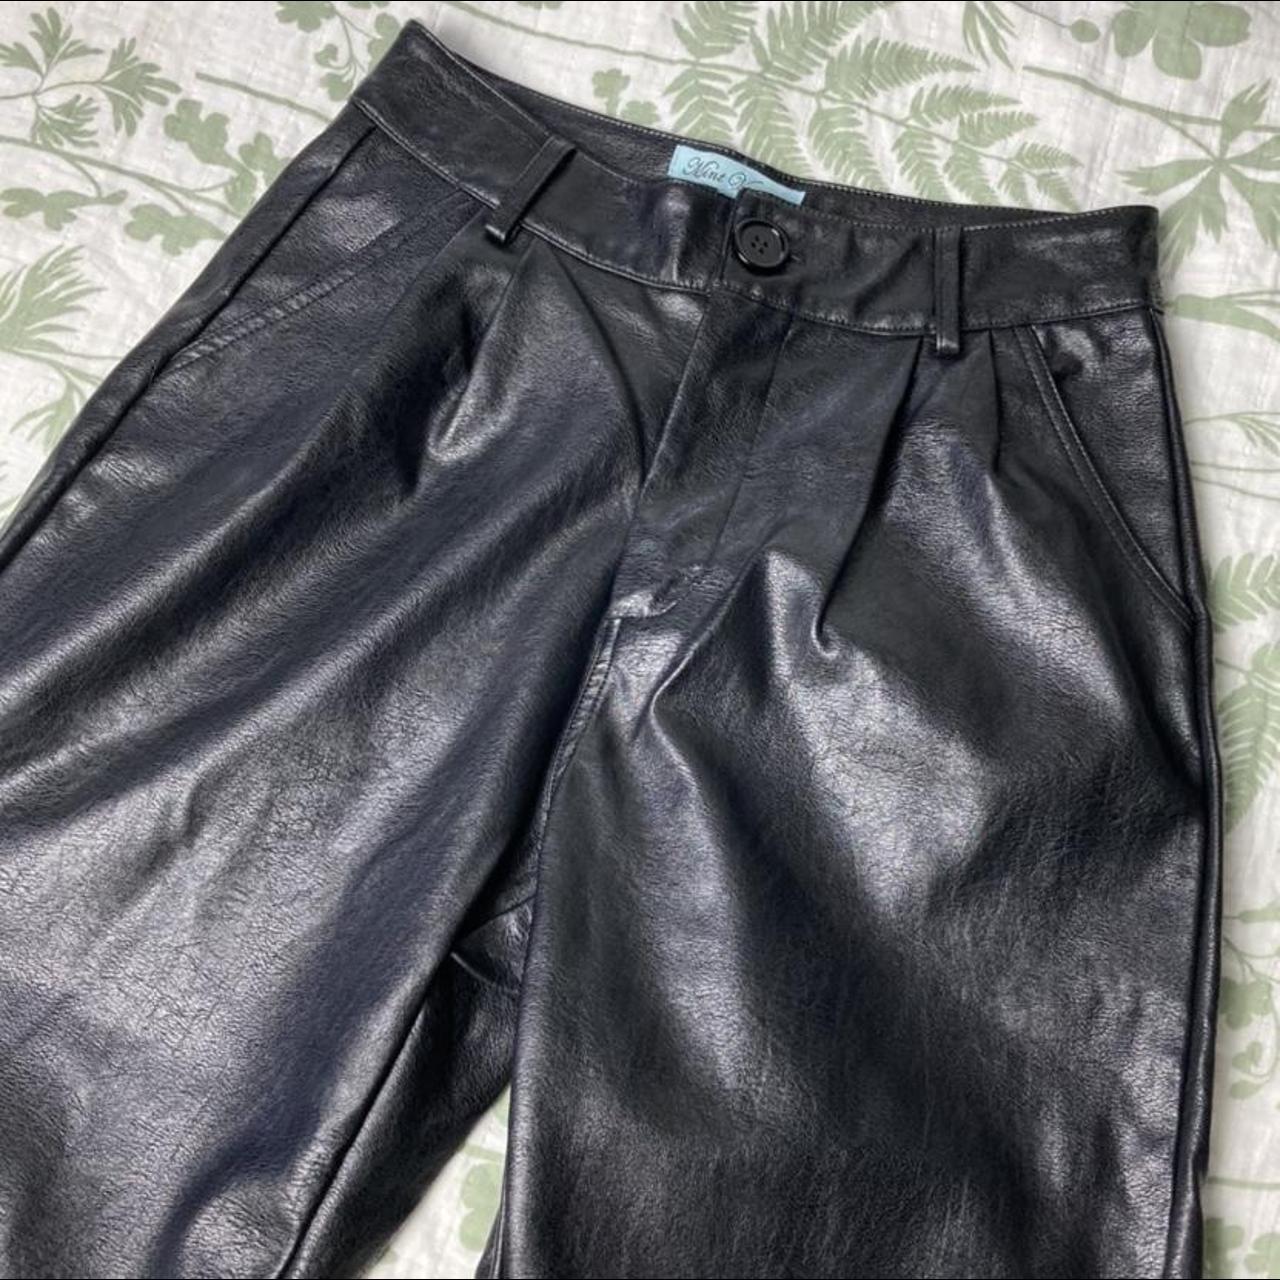 Mint vanilla leather pants! - In perfect... - Depop